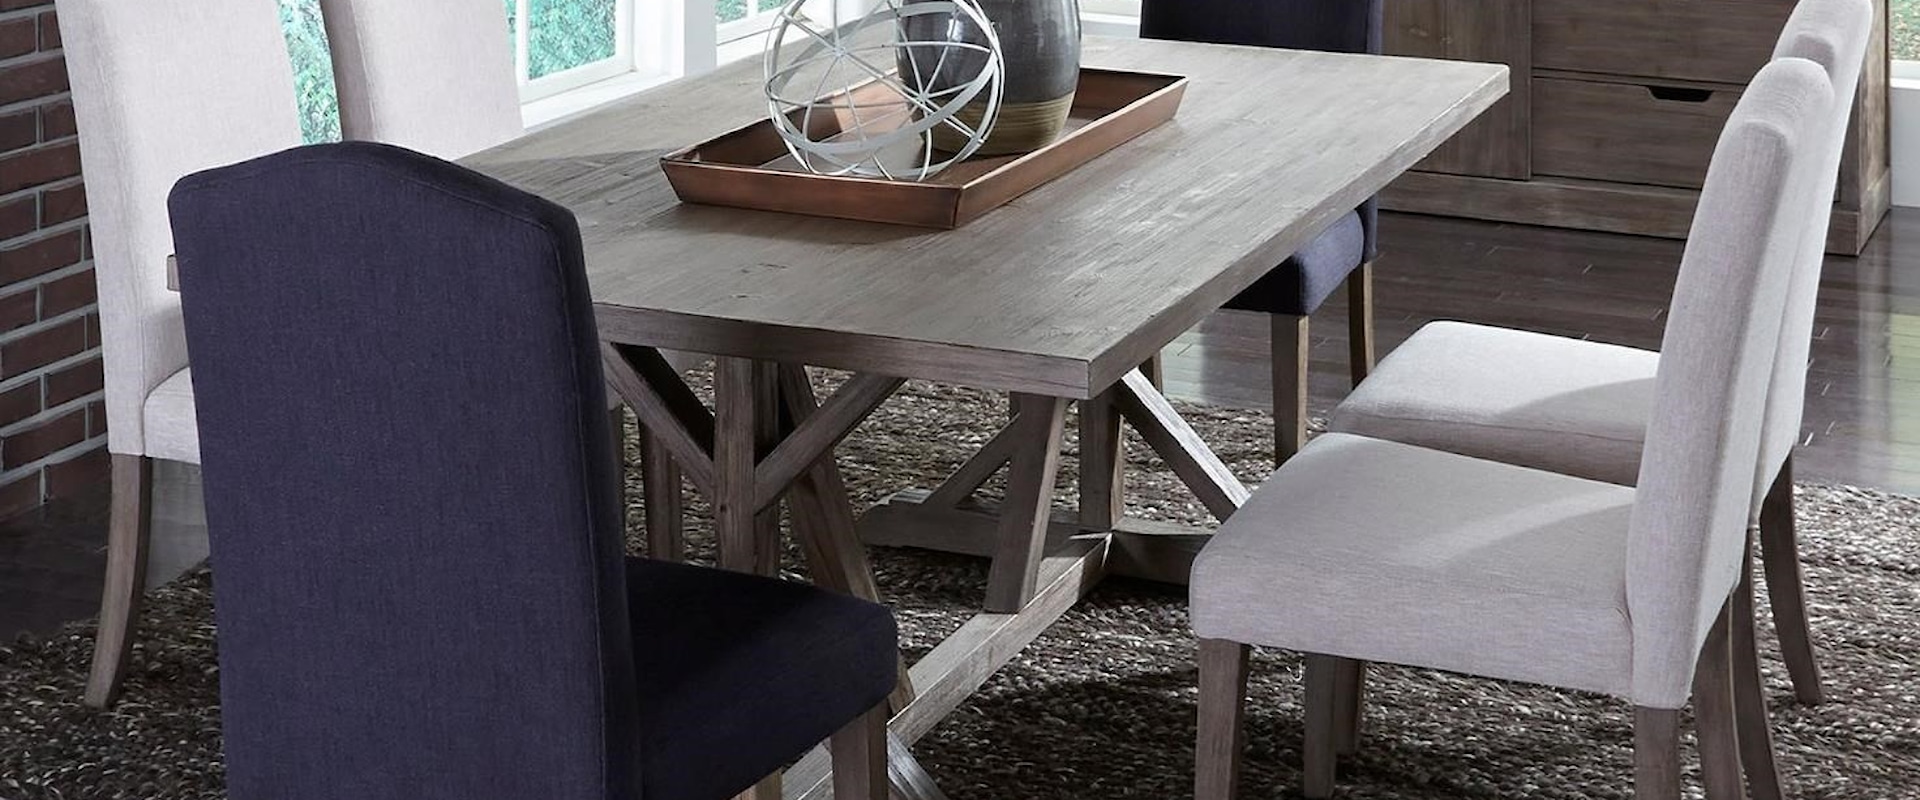 7 Piece Trestle Table Set with Parson's Chairs